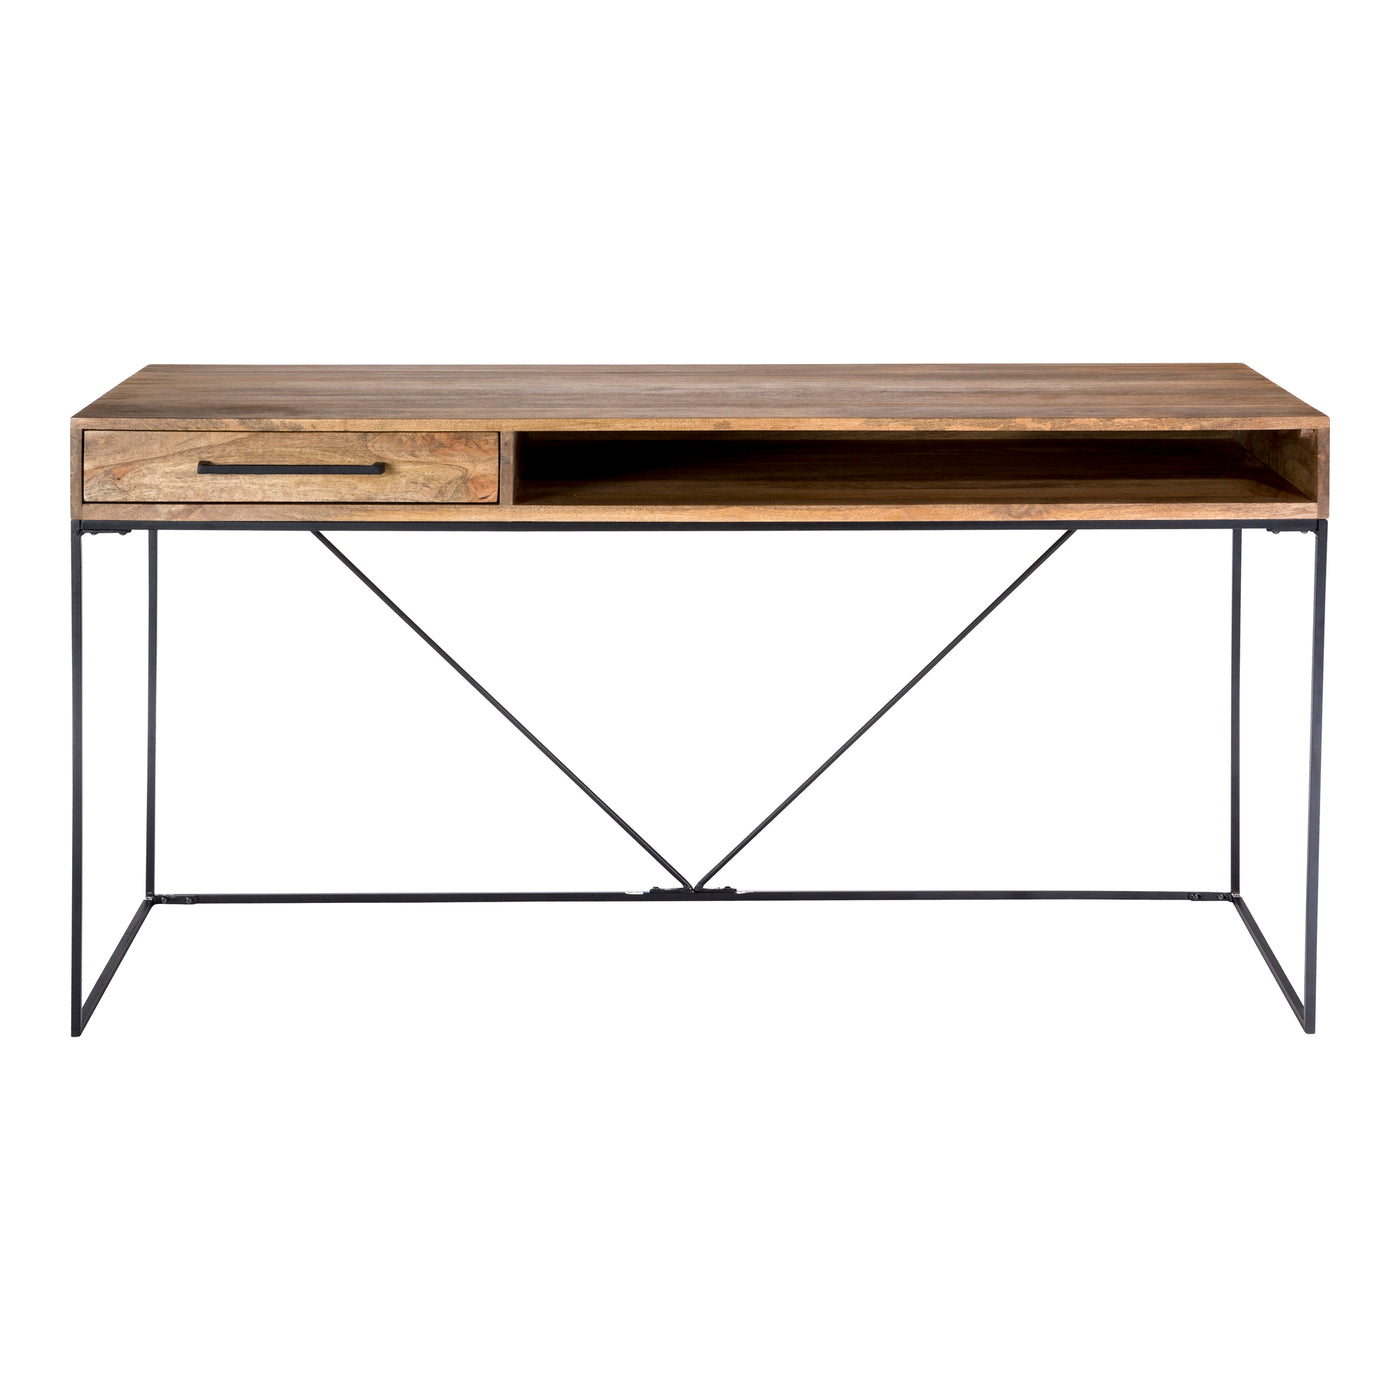 The Colvin office desk embodies a sleek industrial design that's perfect for every multitasker. Storage and organization a...